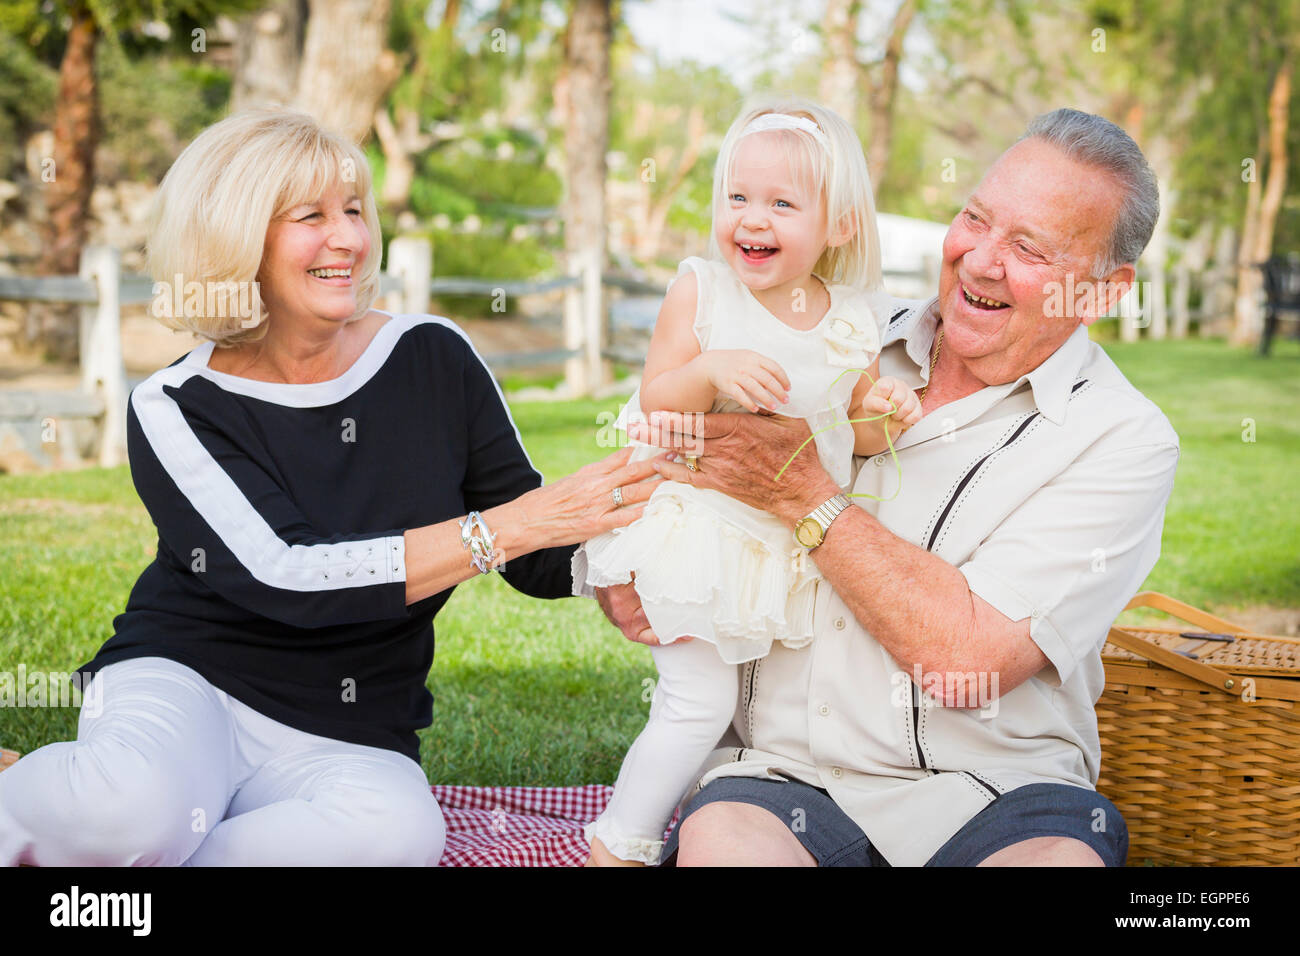 Affectionate Granddaughter and Grandparents Playing Outside At The Park. Stock Photo